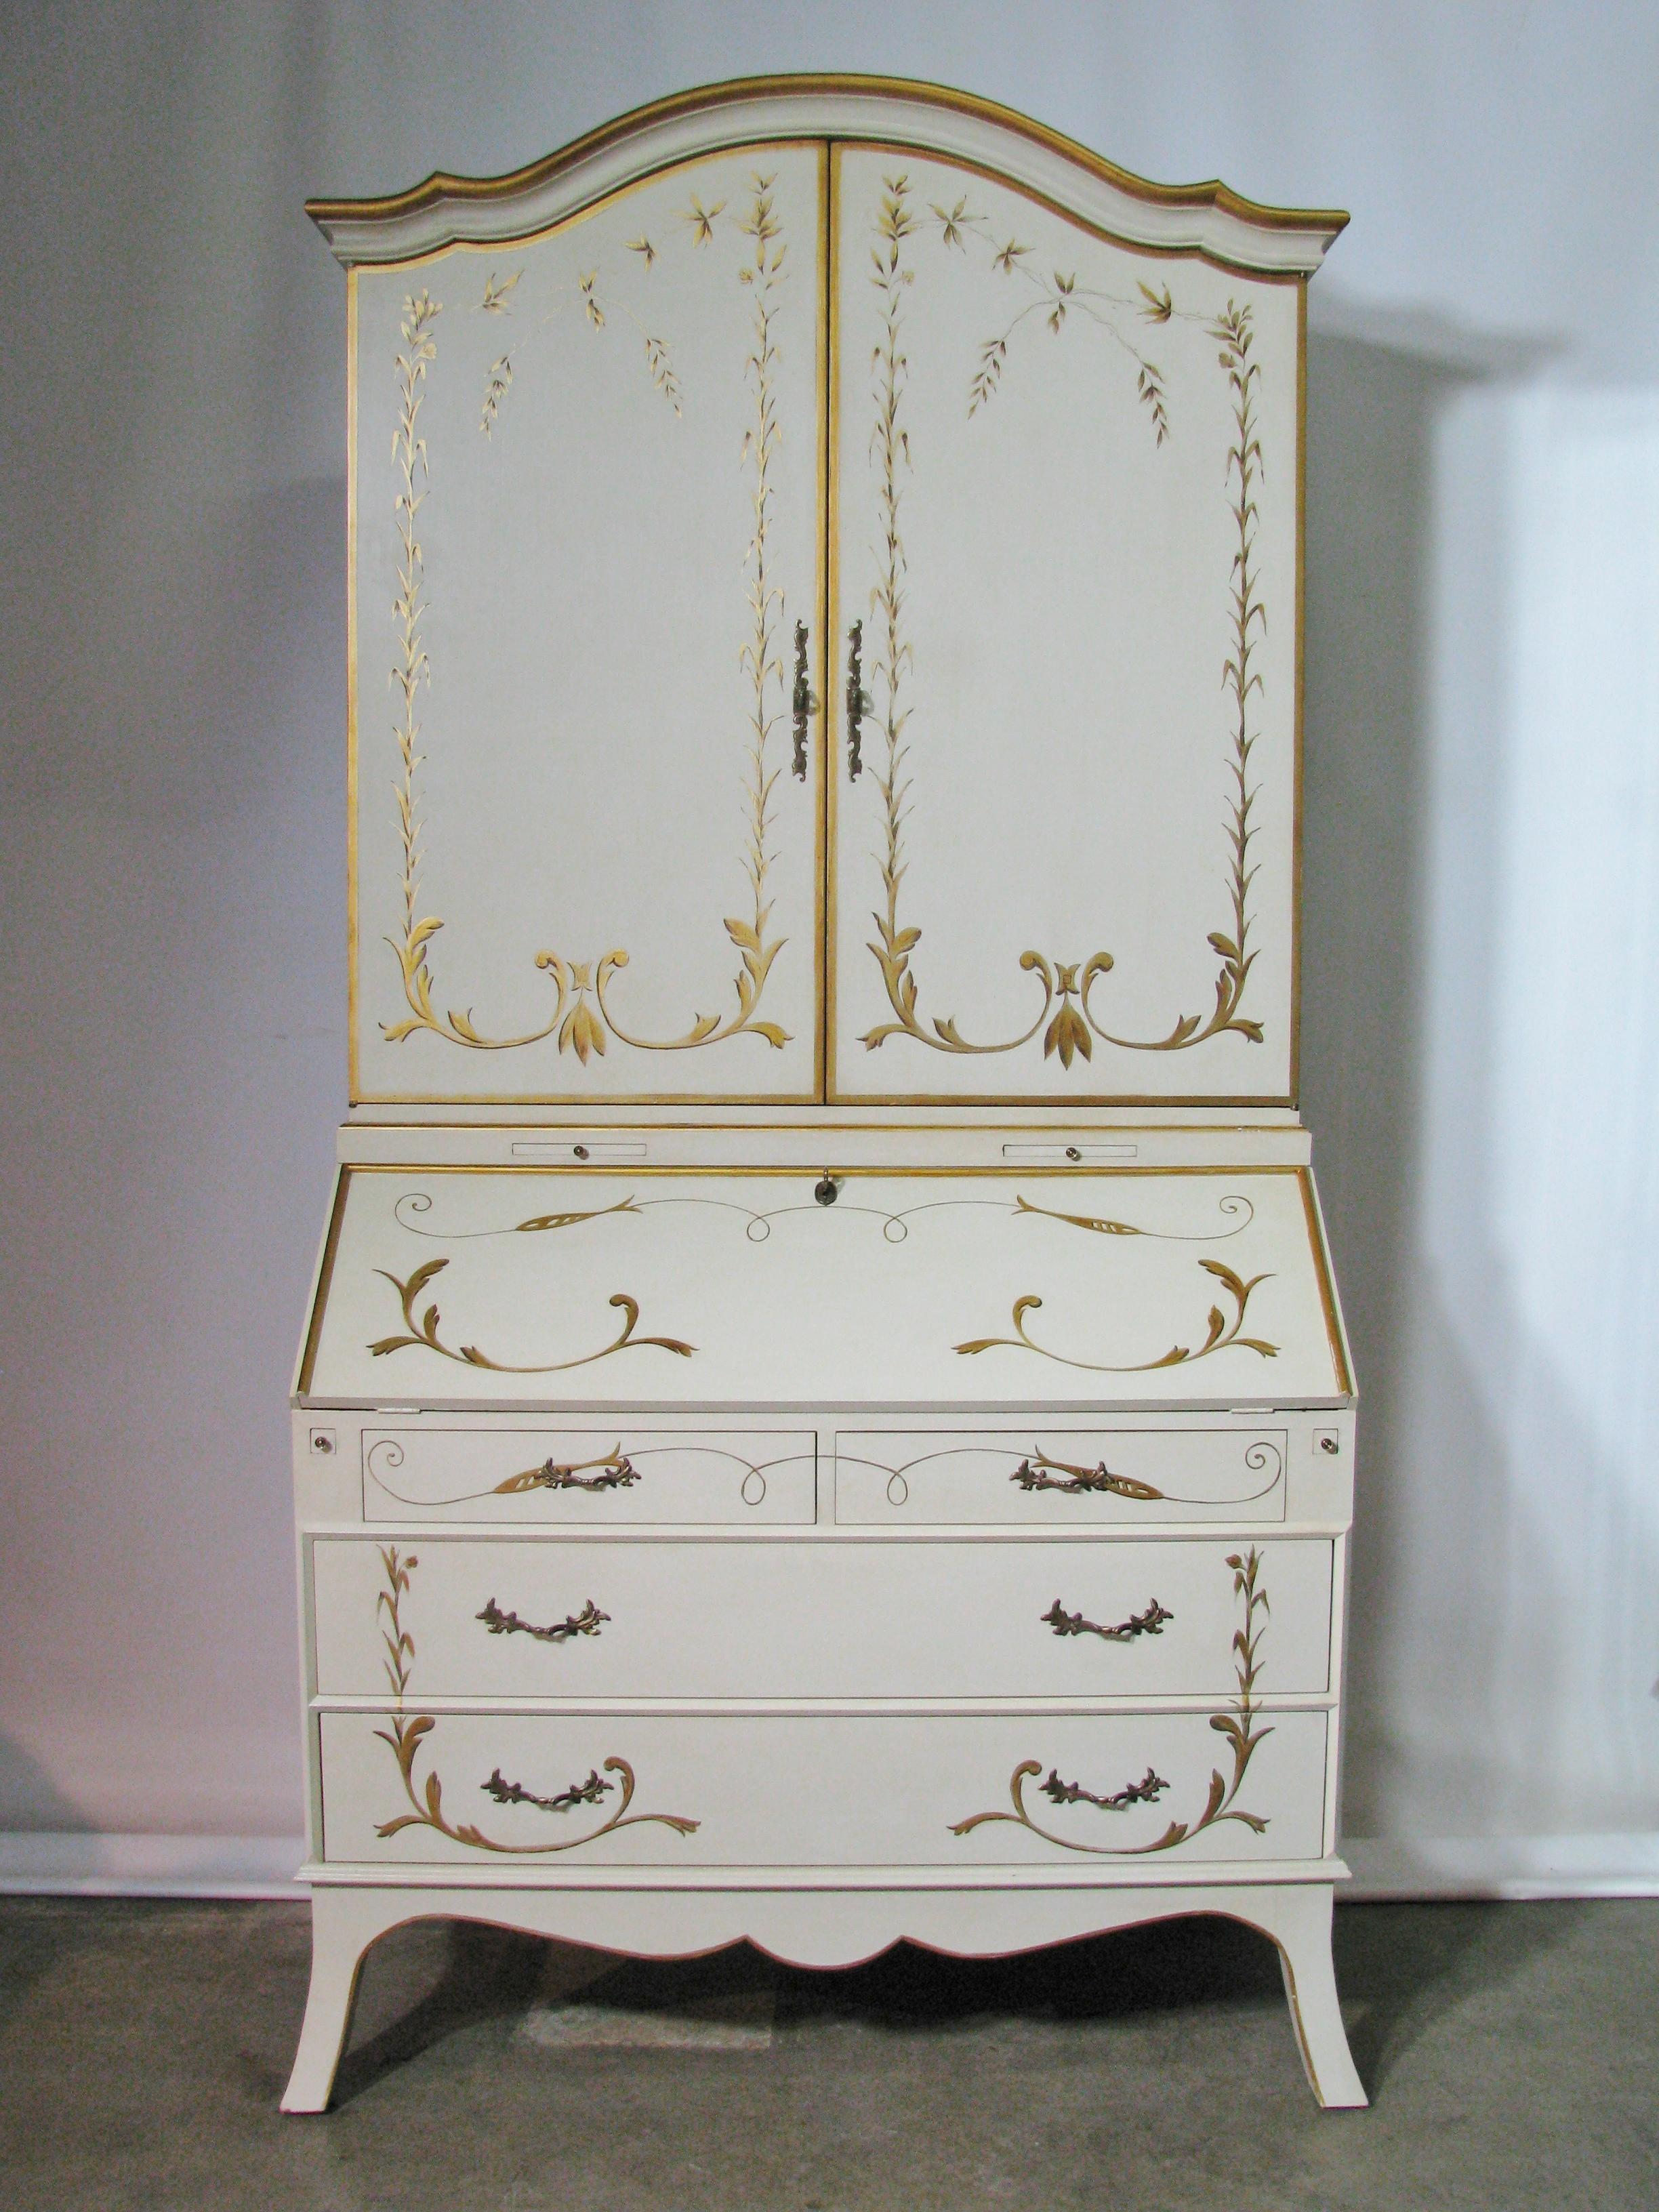 Striking slant-front secretary bookcase by Julia Gray, Ltd. Rich ivory-painted color inside and out. Accented with hand-painted gilt motifs on the front and sides, as well as on the interior sides of the doors. The slant front opens and rests on two